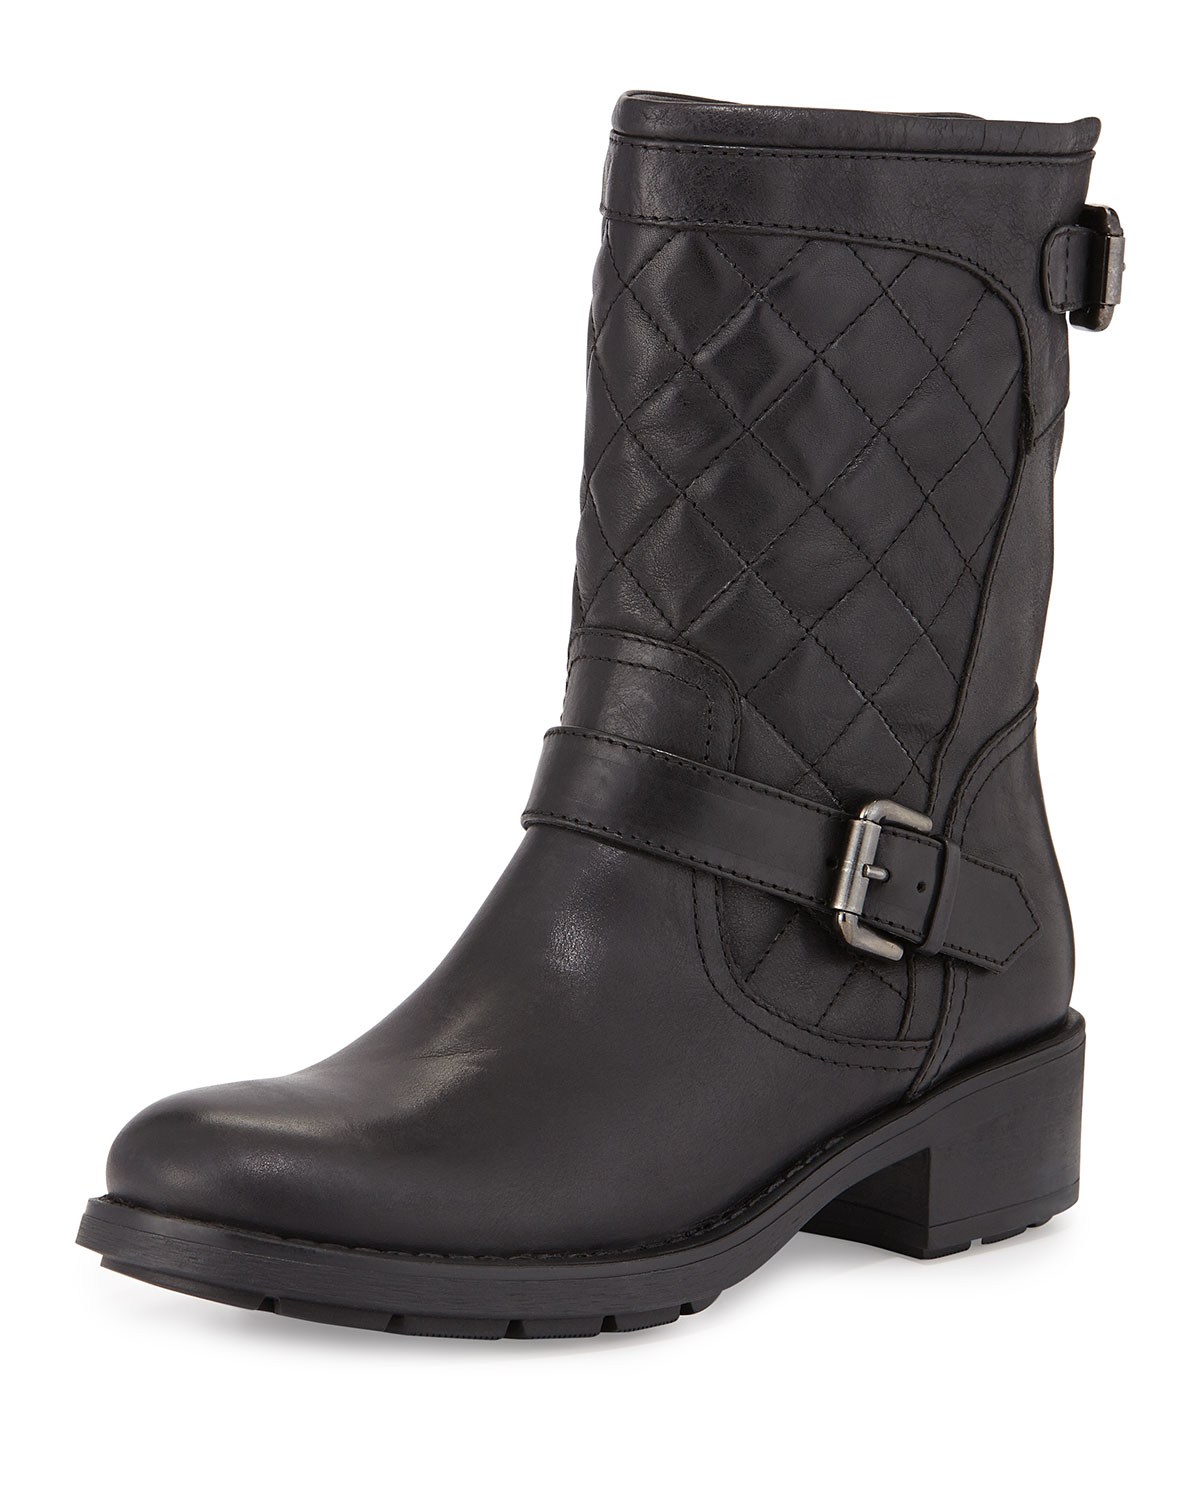 Aquatalia Sweetie Quilted Leather Moto Boot in Black - Lyst